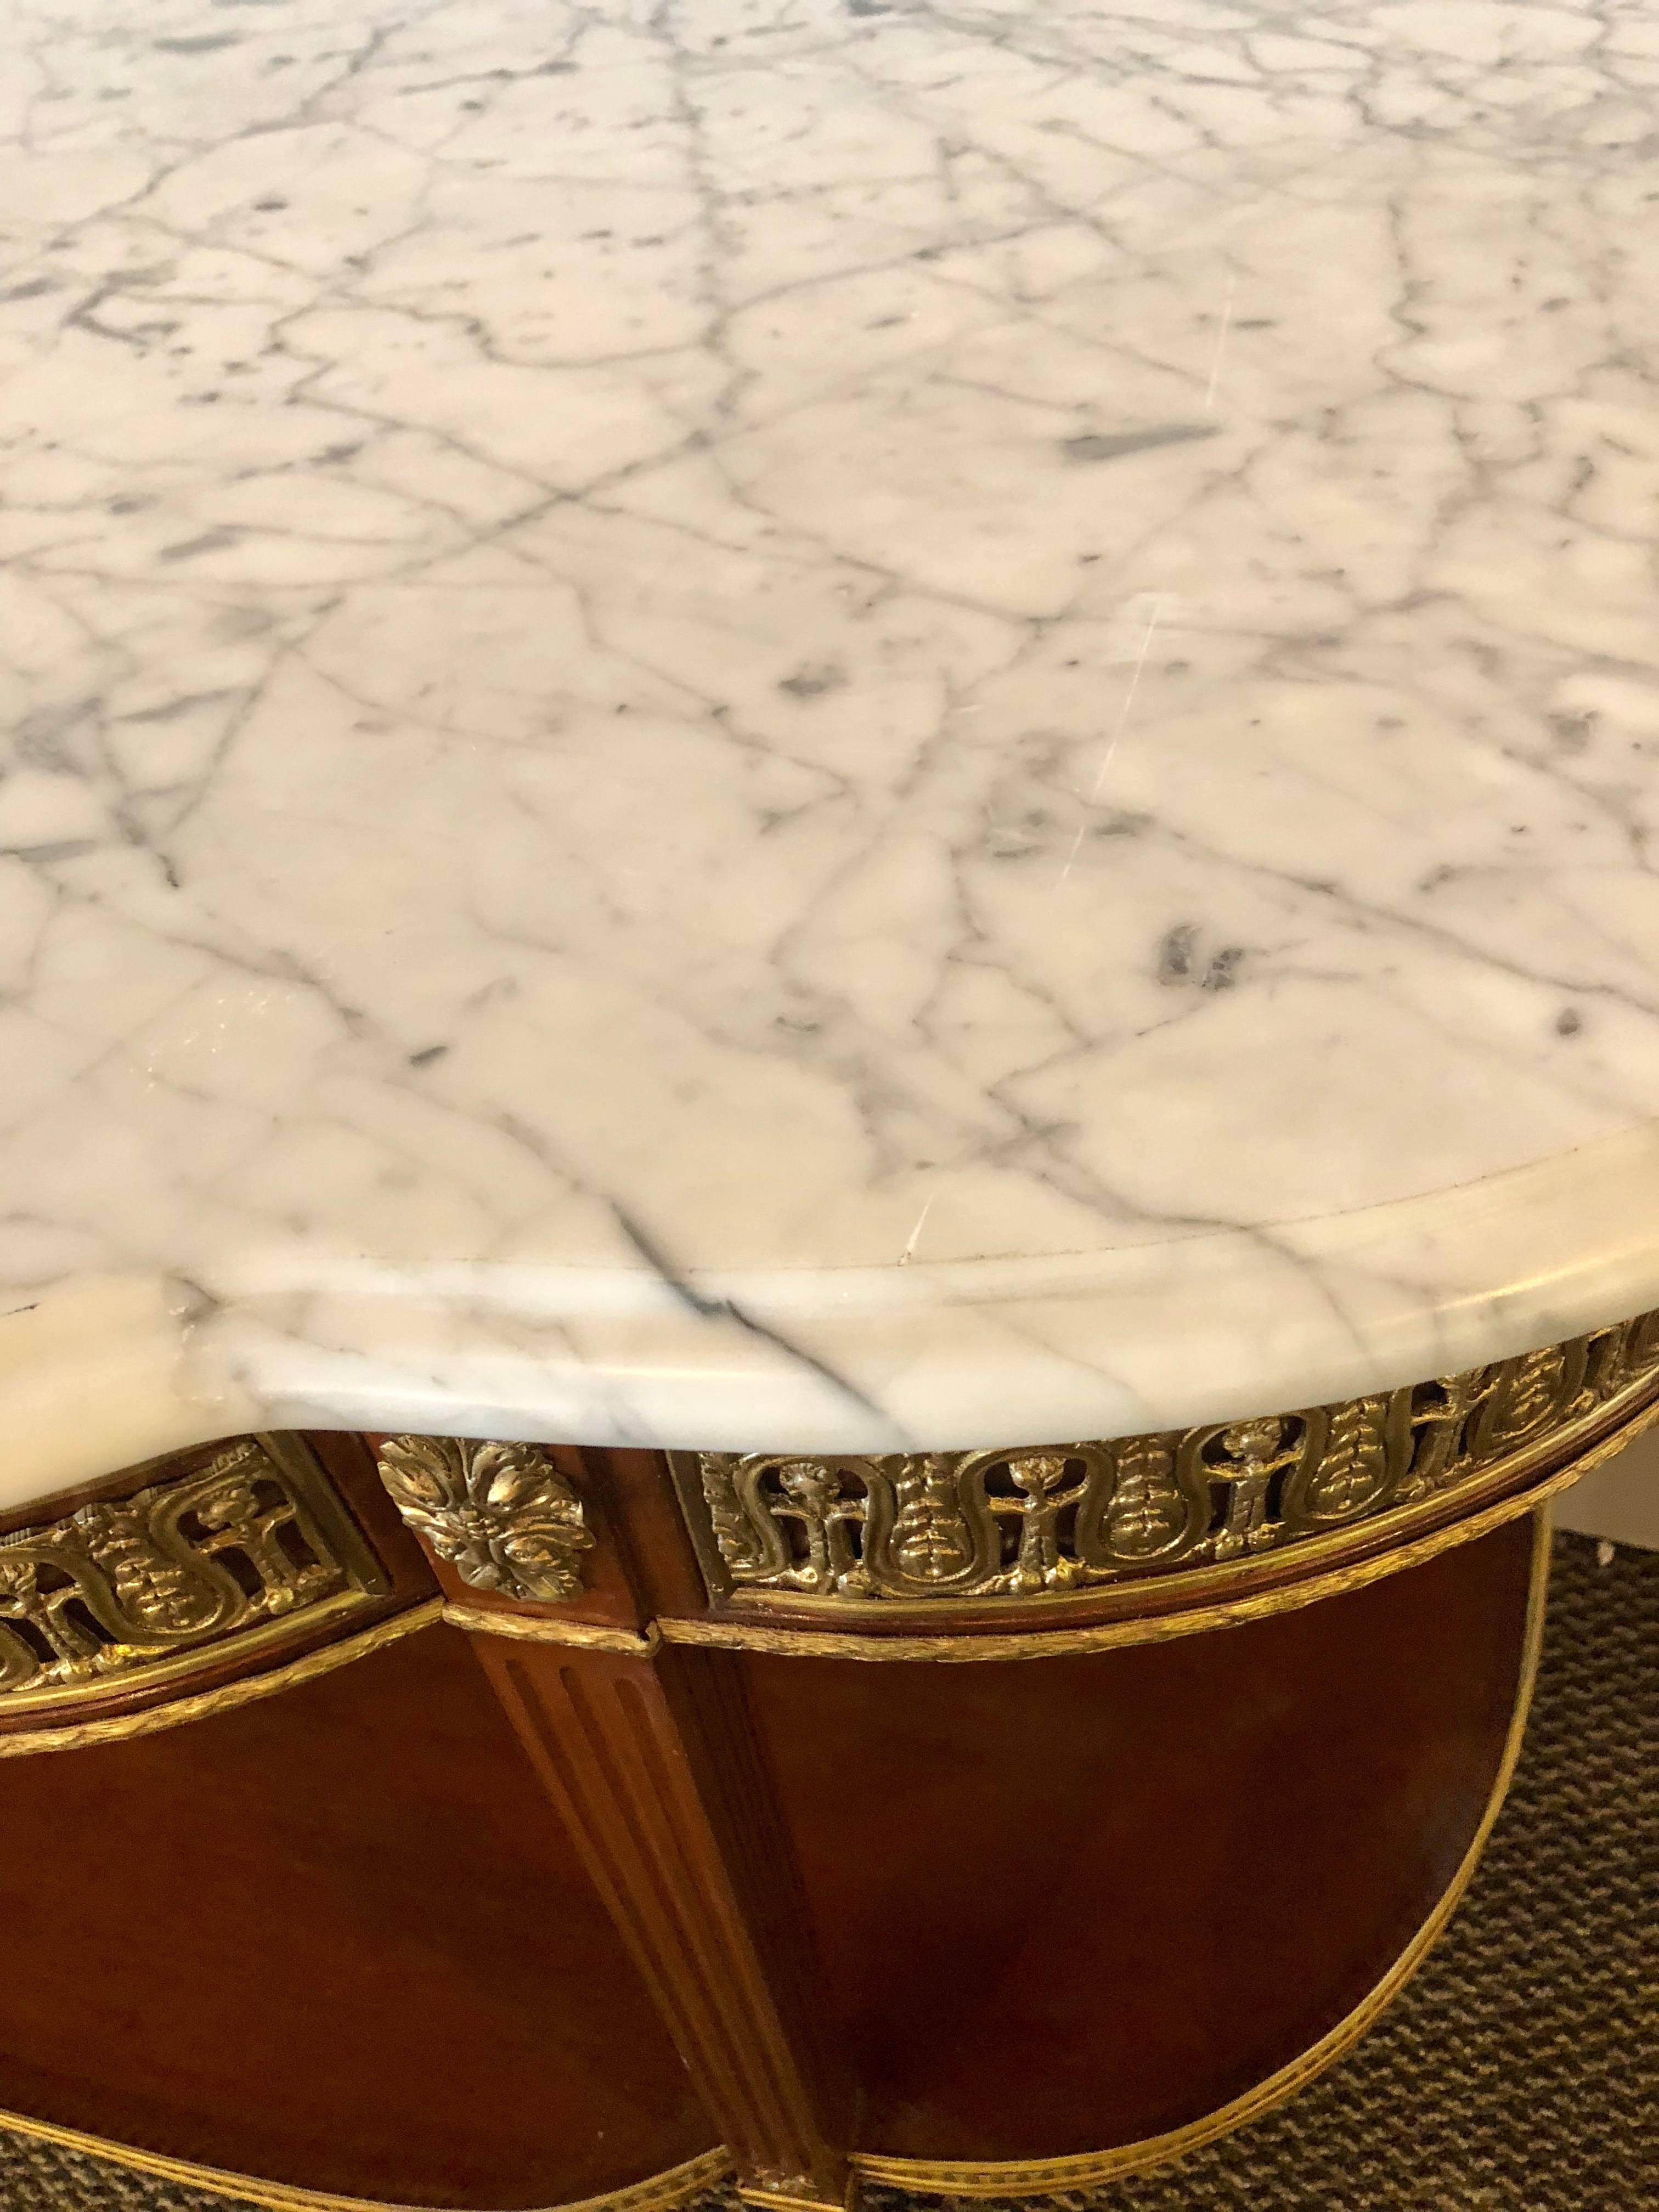 A fine pair of Palatial Louis XVI Jansen style marble-top console tables or sideboards with bevel mirror back panels. This pair of Maison Jansen style demilune form console tables are not only monumental in size but the custom quality is second to